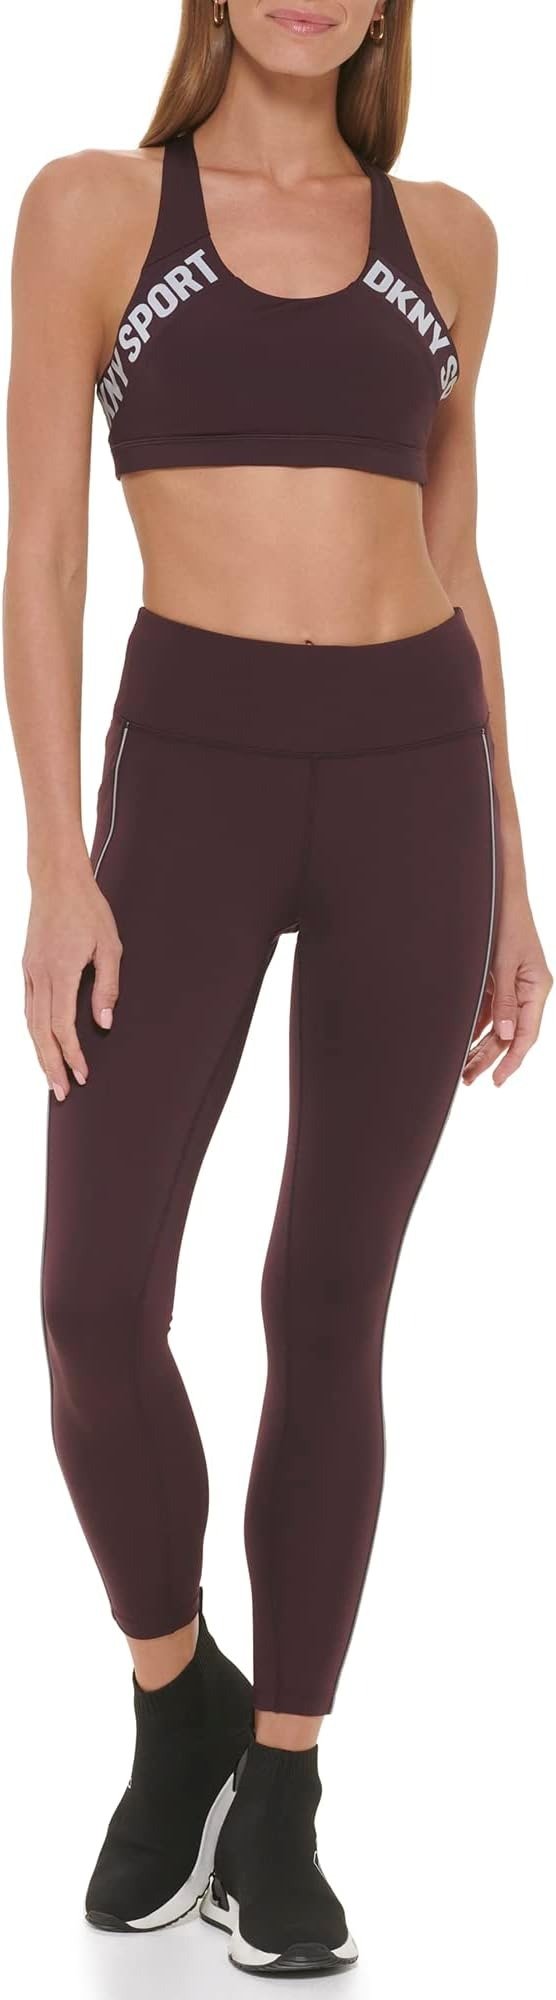 High Waist Women’s Leggings with Pockets & Reflective Piping